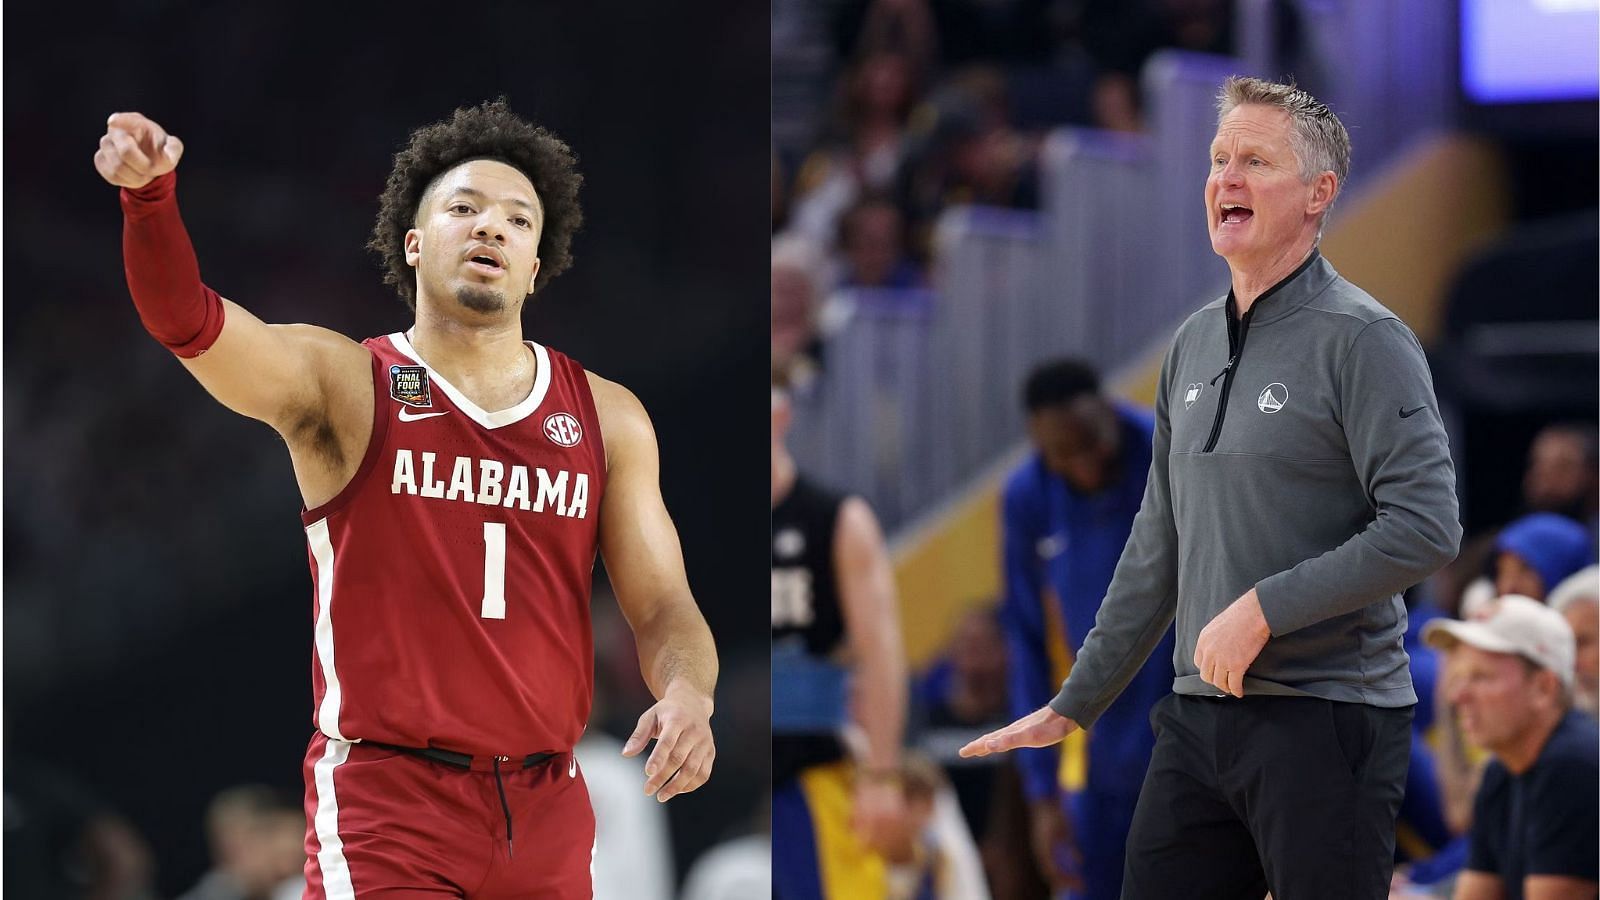 Alabama guard Mark Sears could join forces in the NBA with the Warriors and coach Steve Kerr.